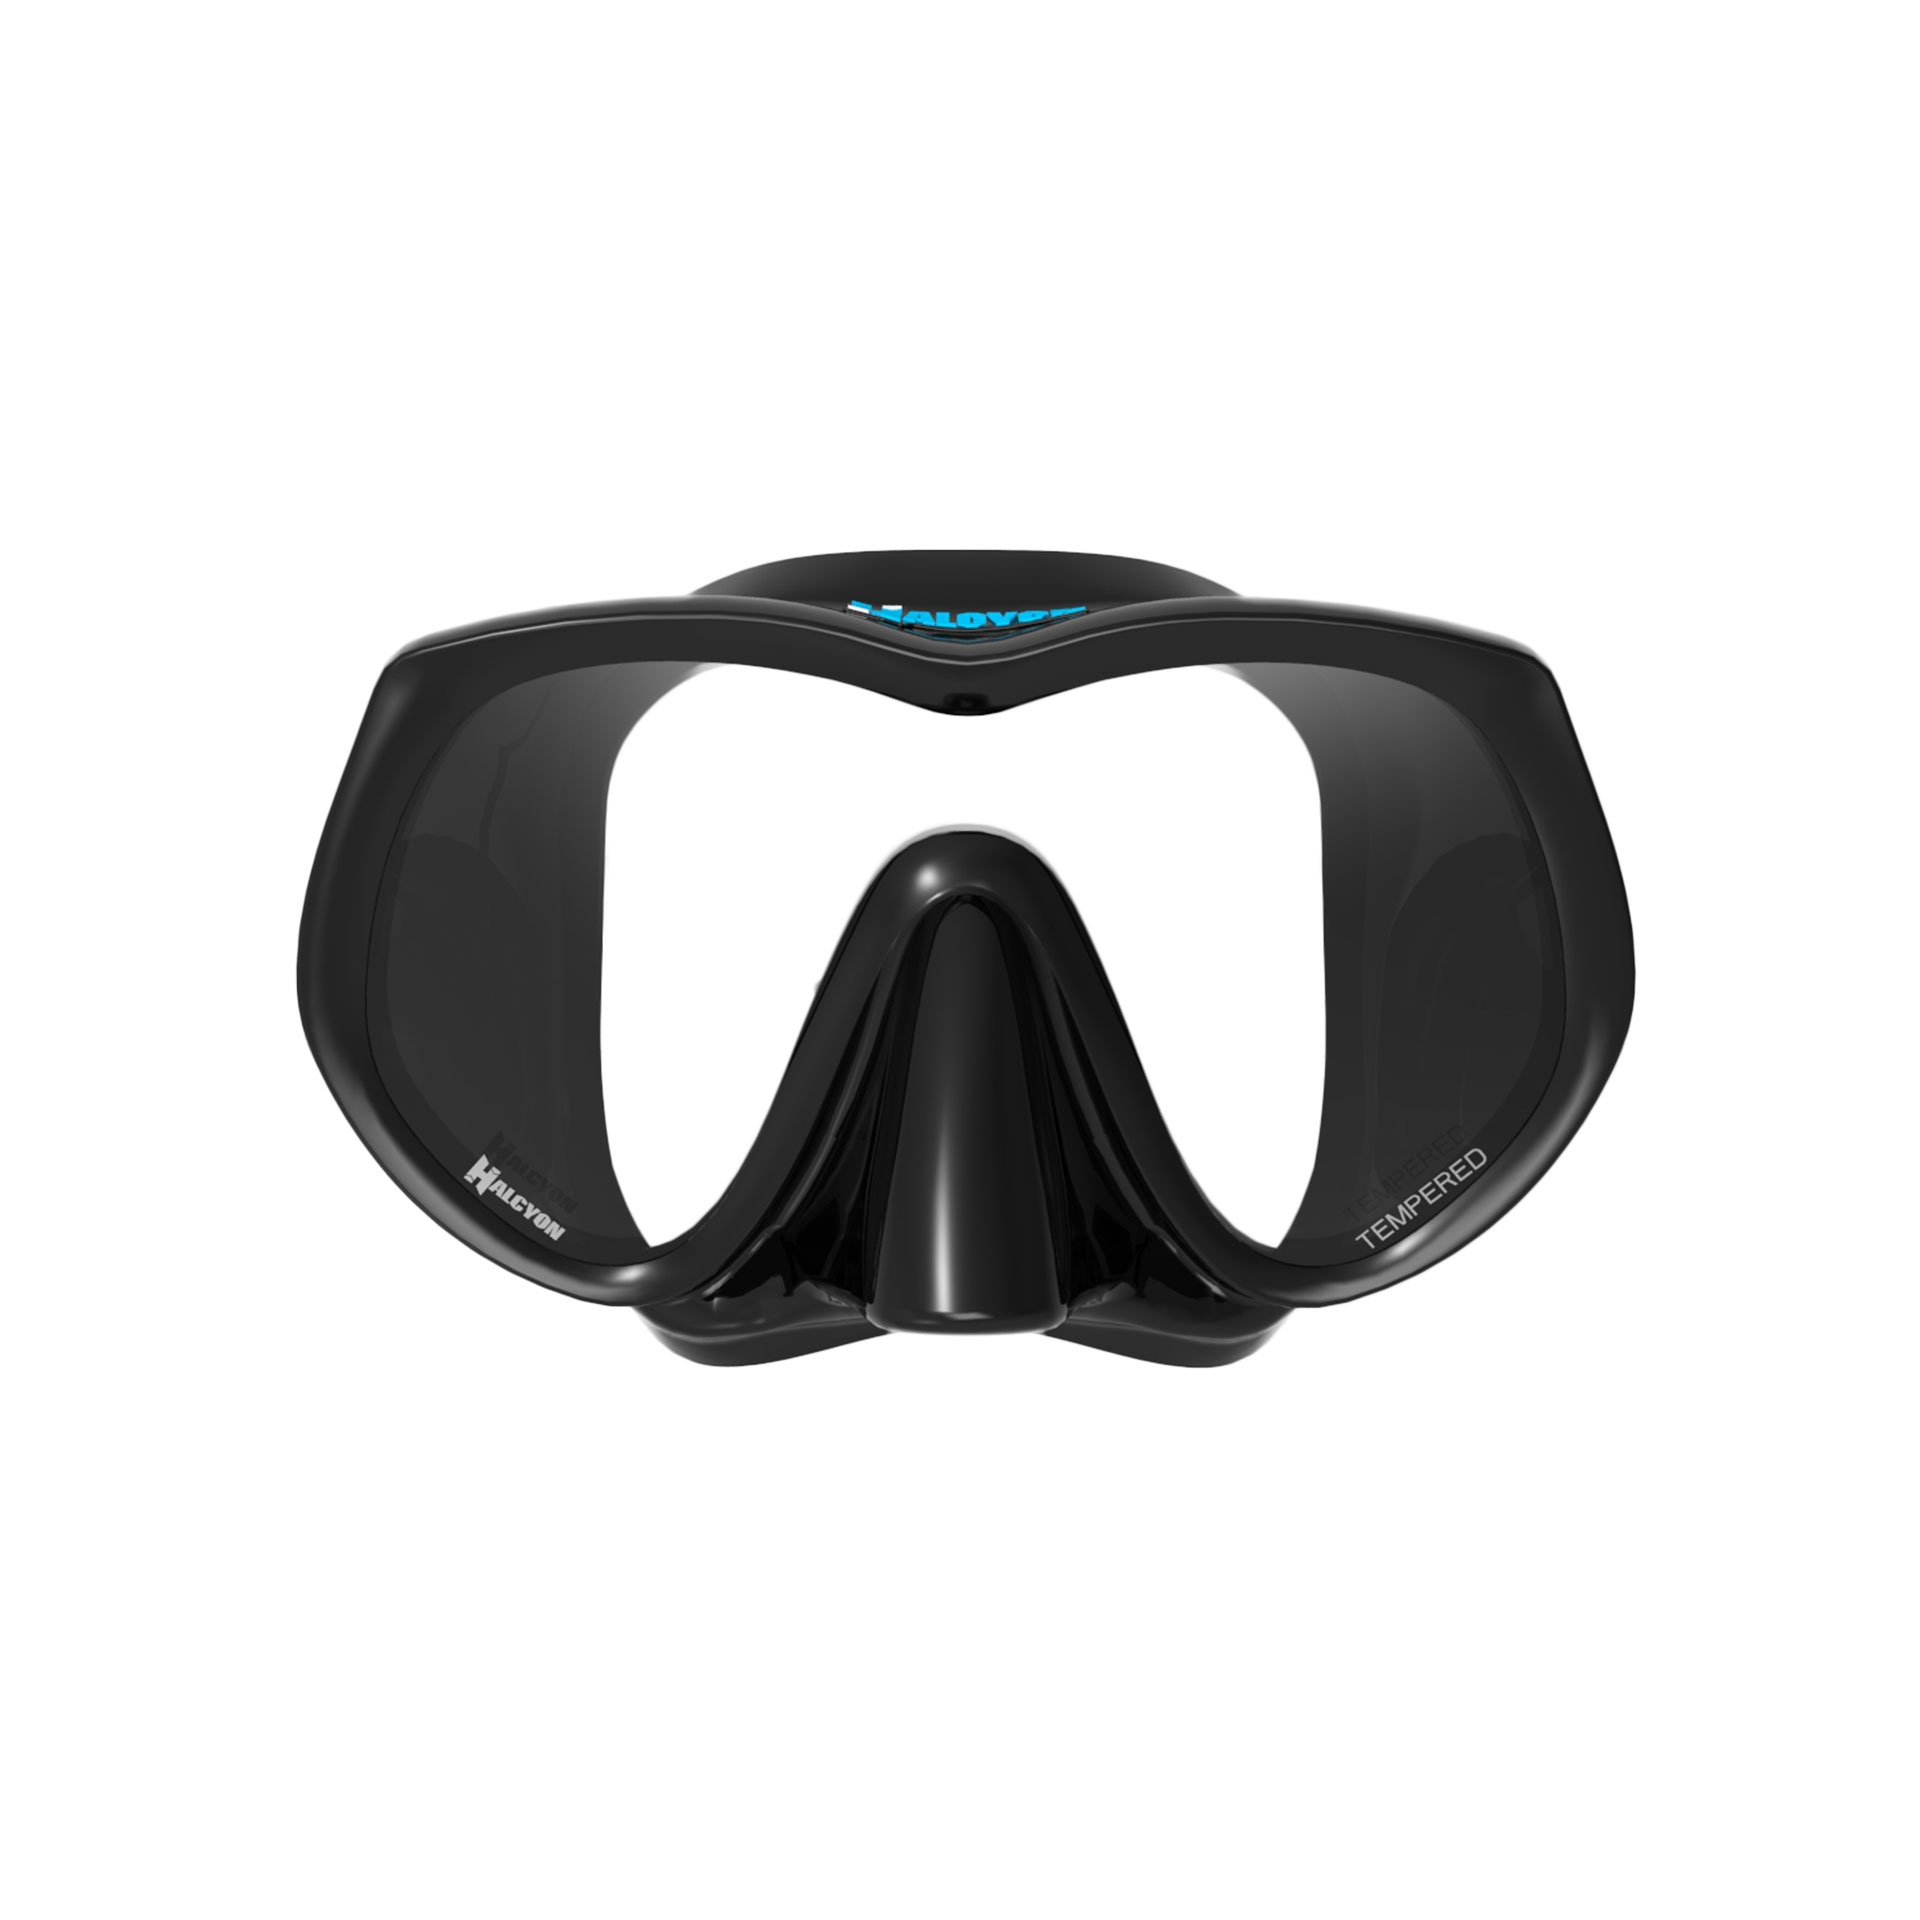 H-View Mask